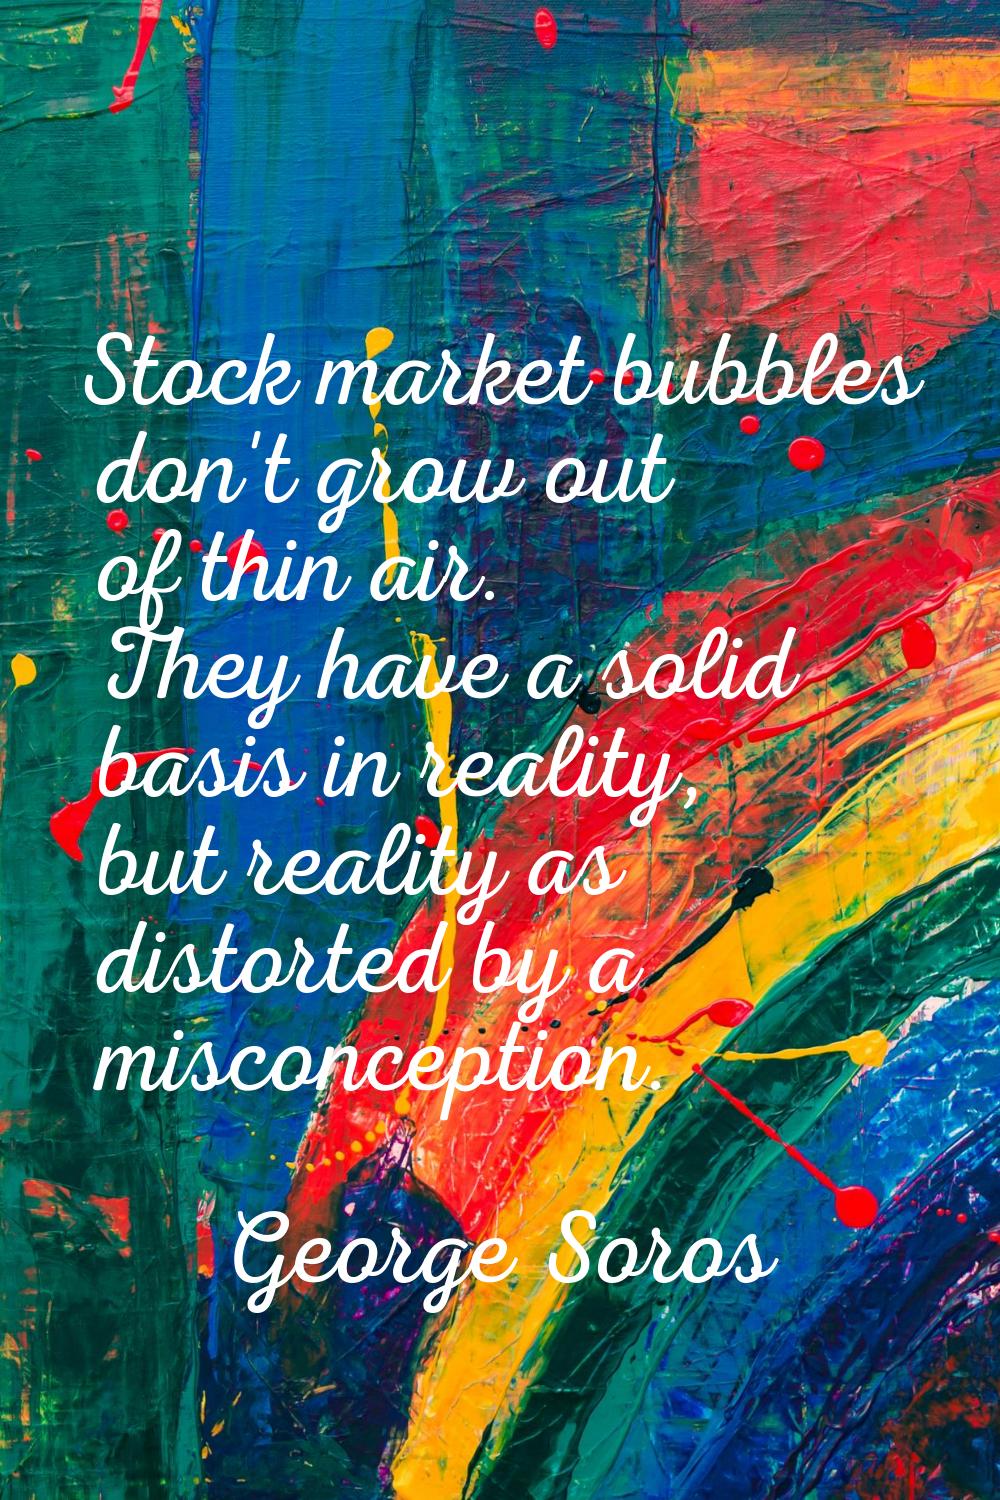 Stock market bubbles don't grow out of thin air. They have a solid basis in reality, but reality as